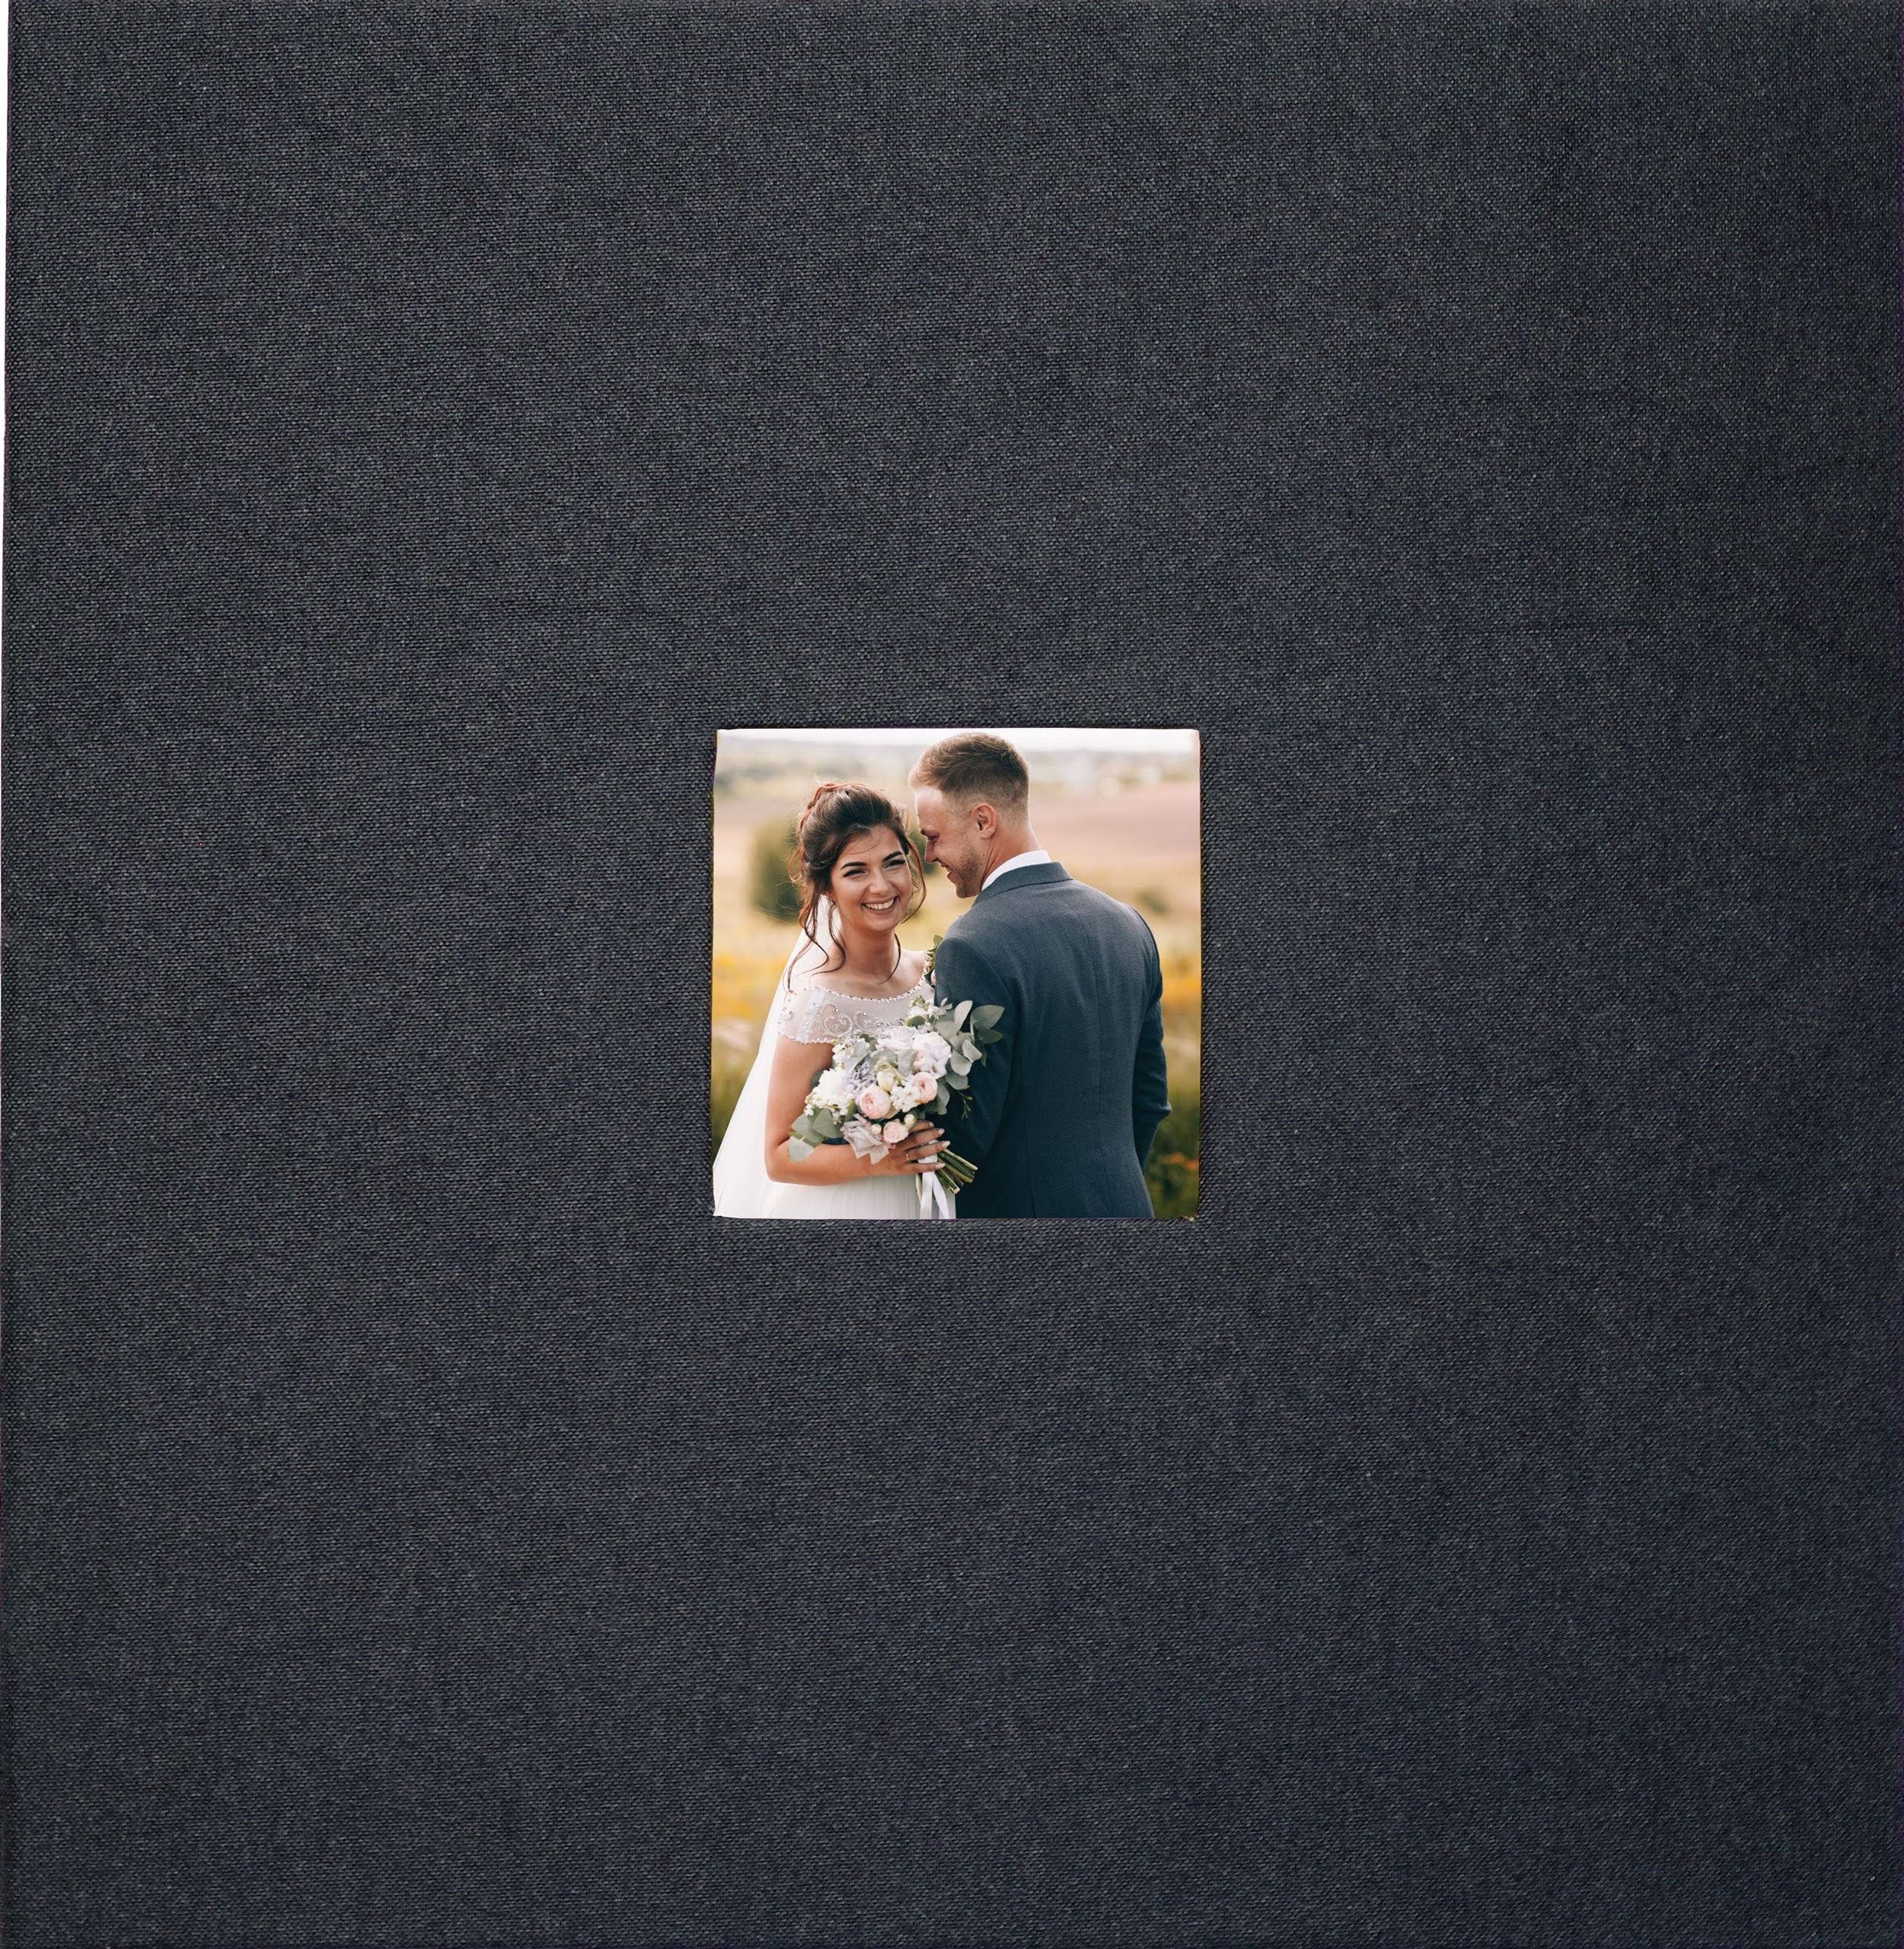 Black Linen Photo Album: 40 Self-Adhesive Pages for Memories | Image